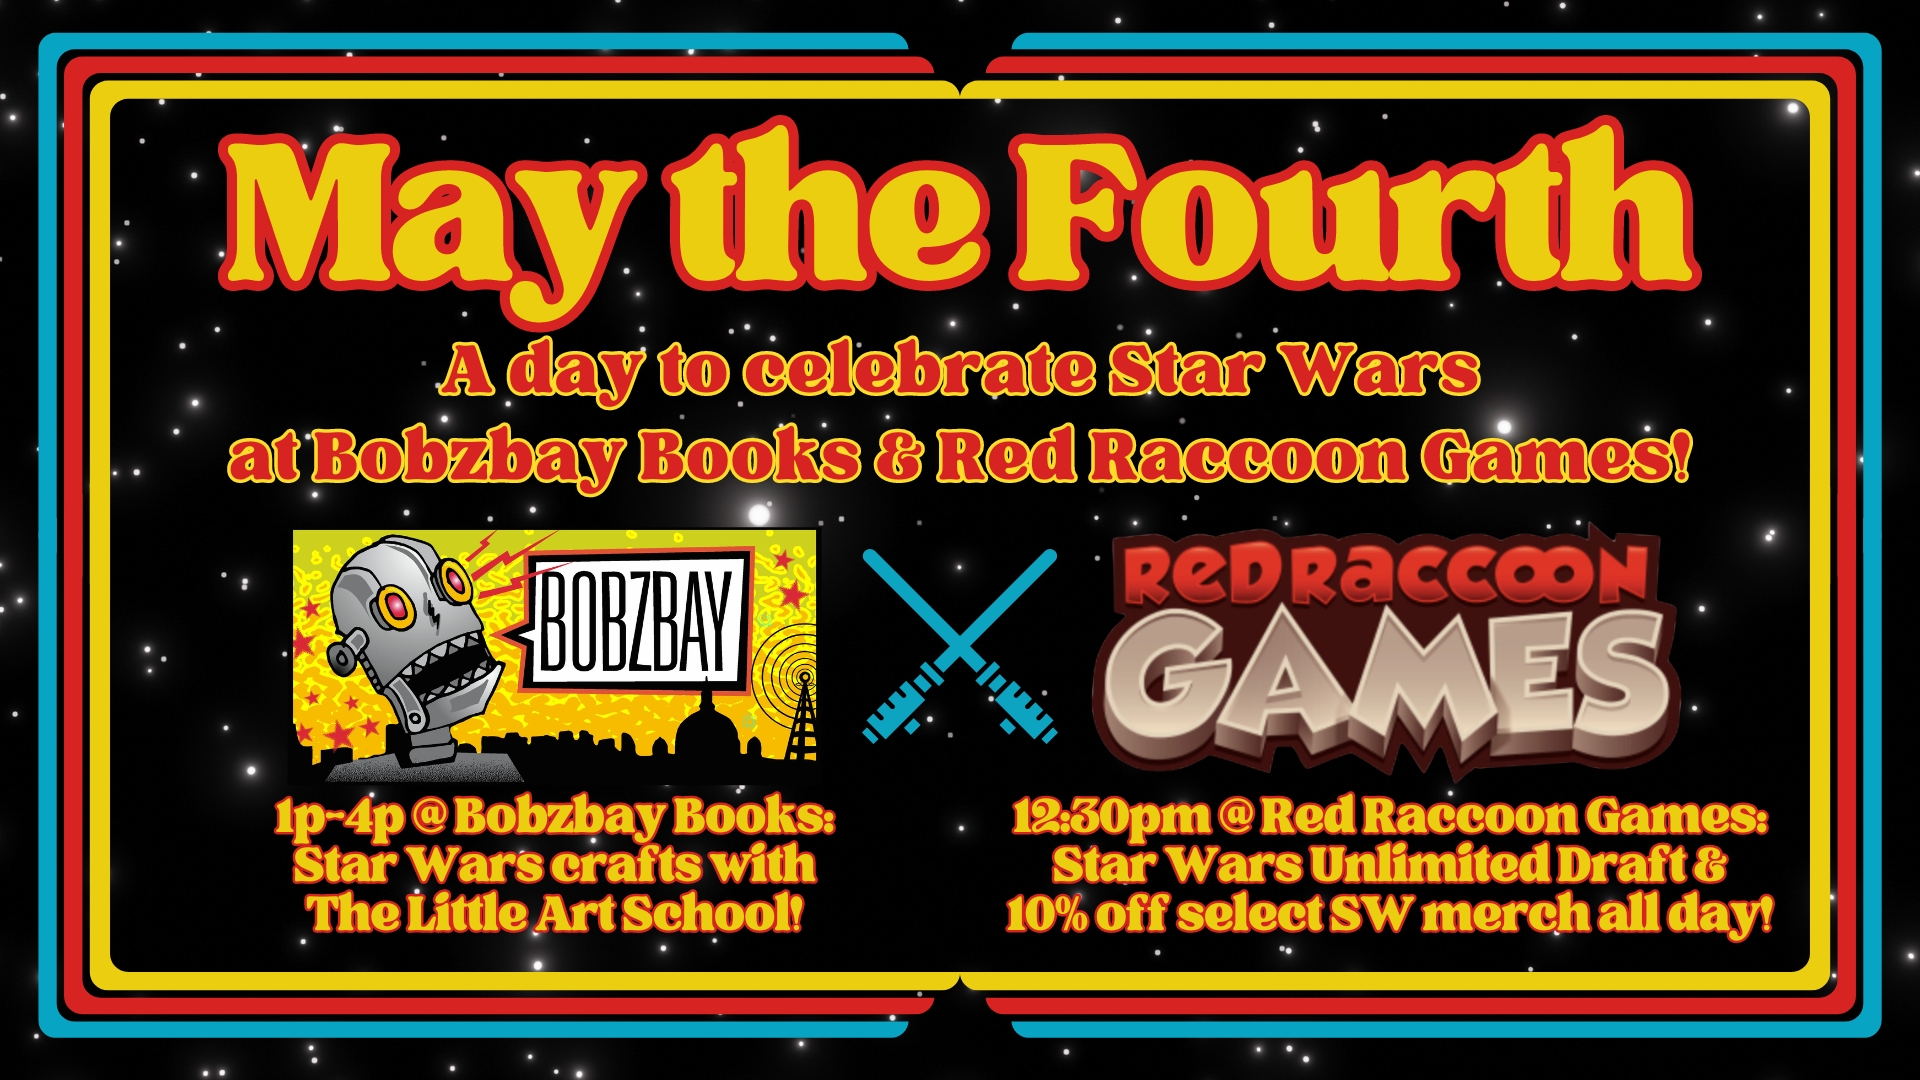 May the Fourth: A Star Wars Celebration with Bobzbay Books & Red Raccoon Games